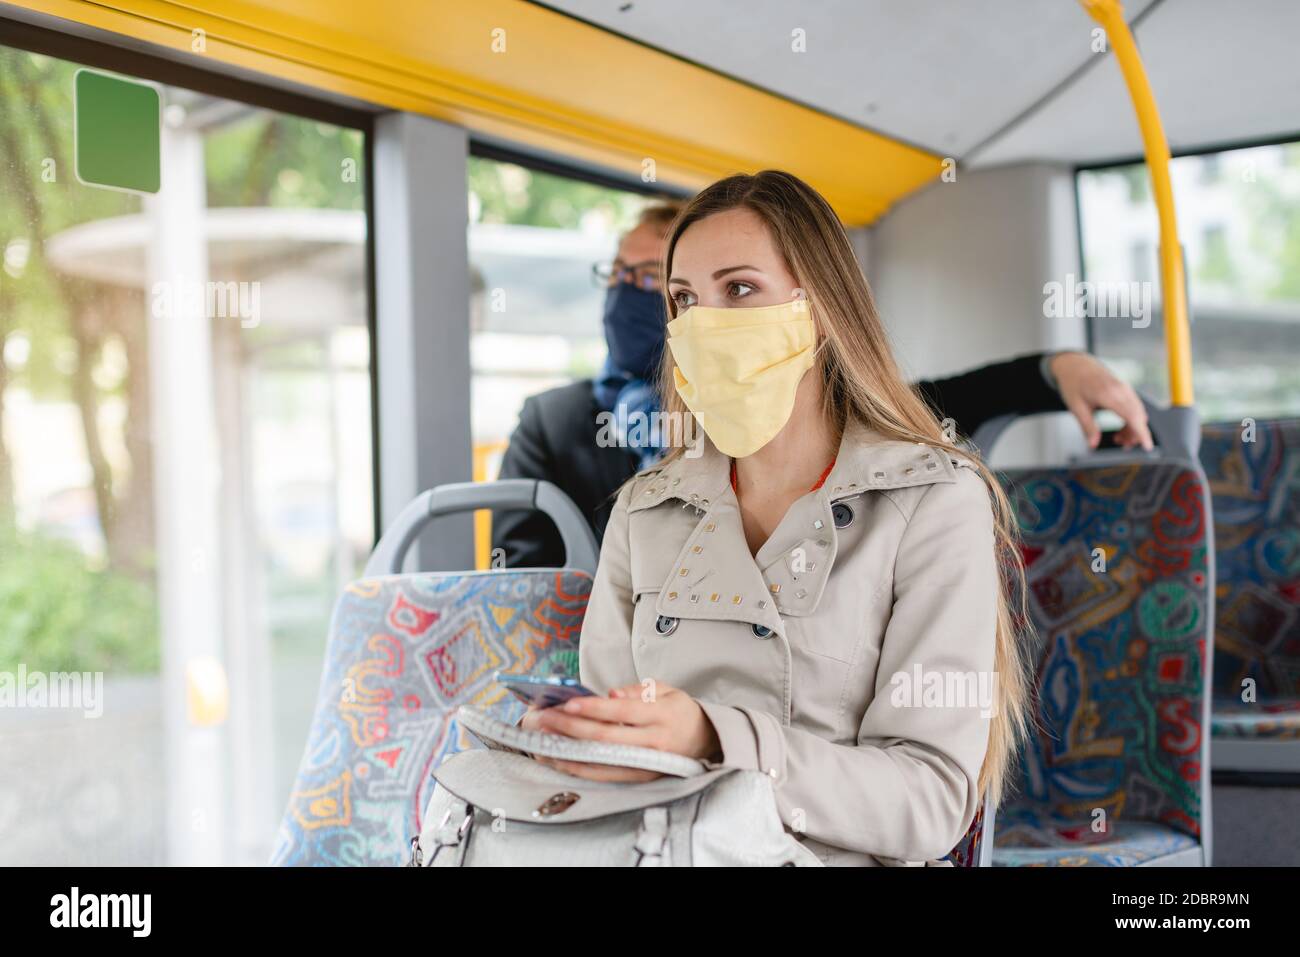 People wearing masks in the bus using public transport keeping proper distance Stock Photo